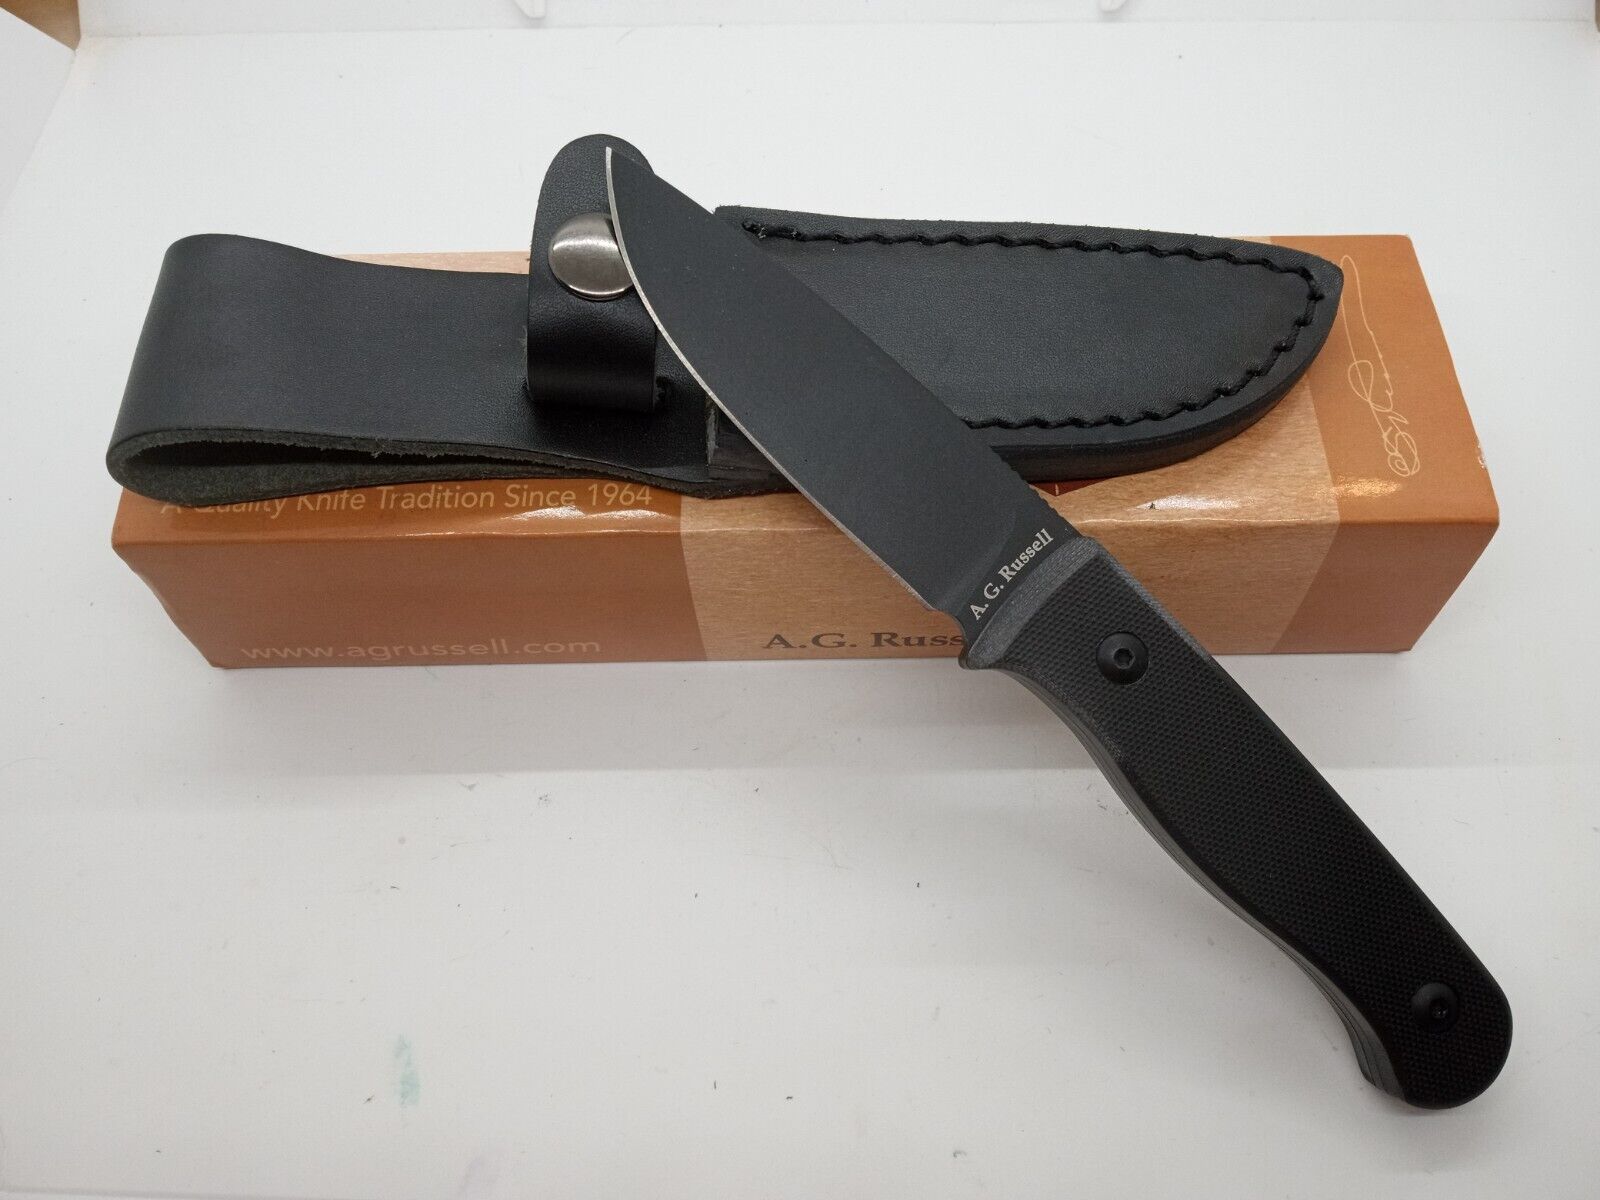 A.G. Russell Hunter fixed blade knife